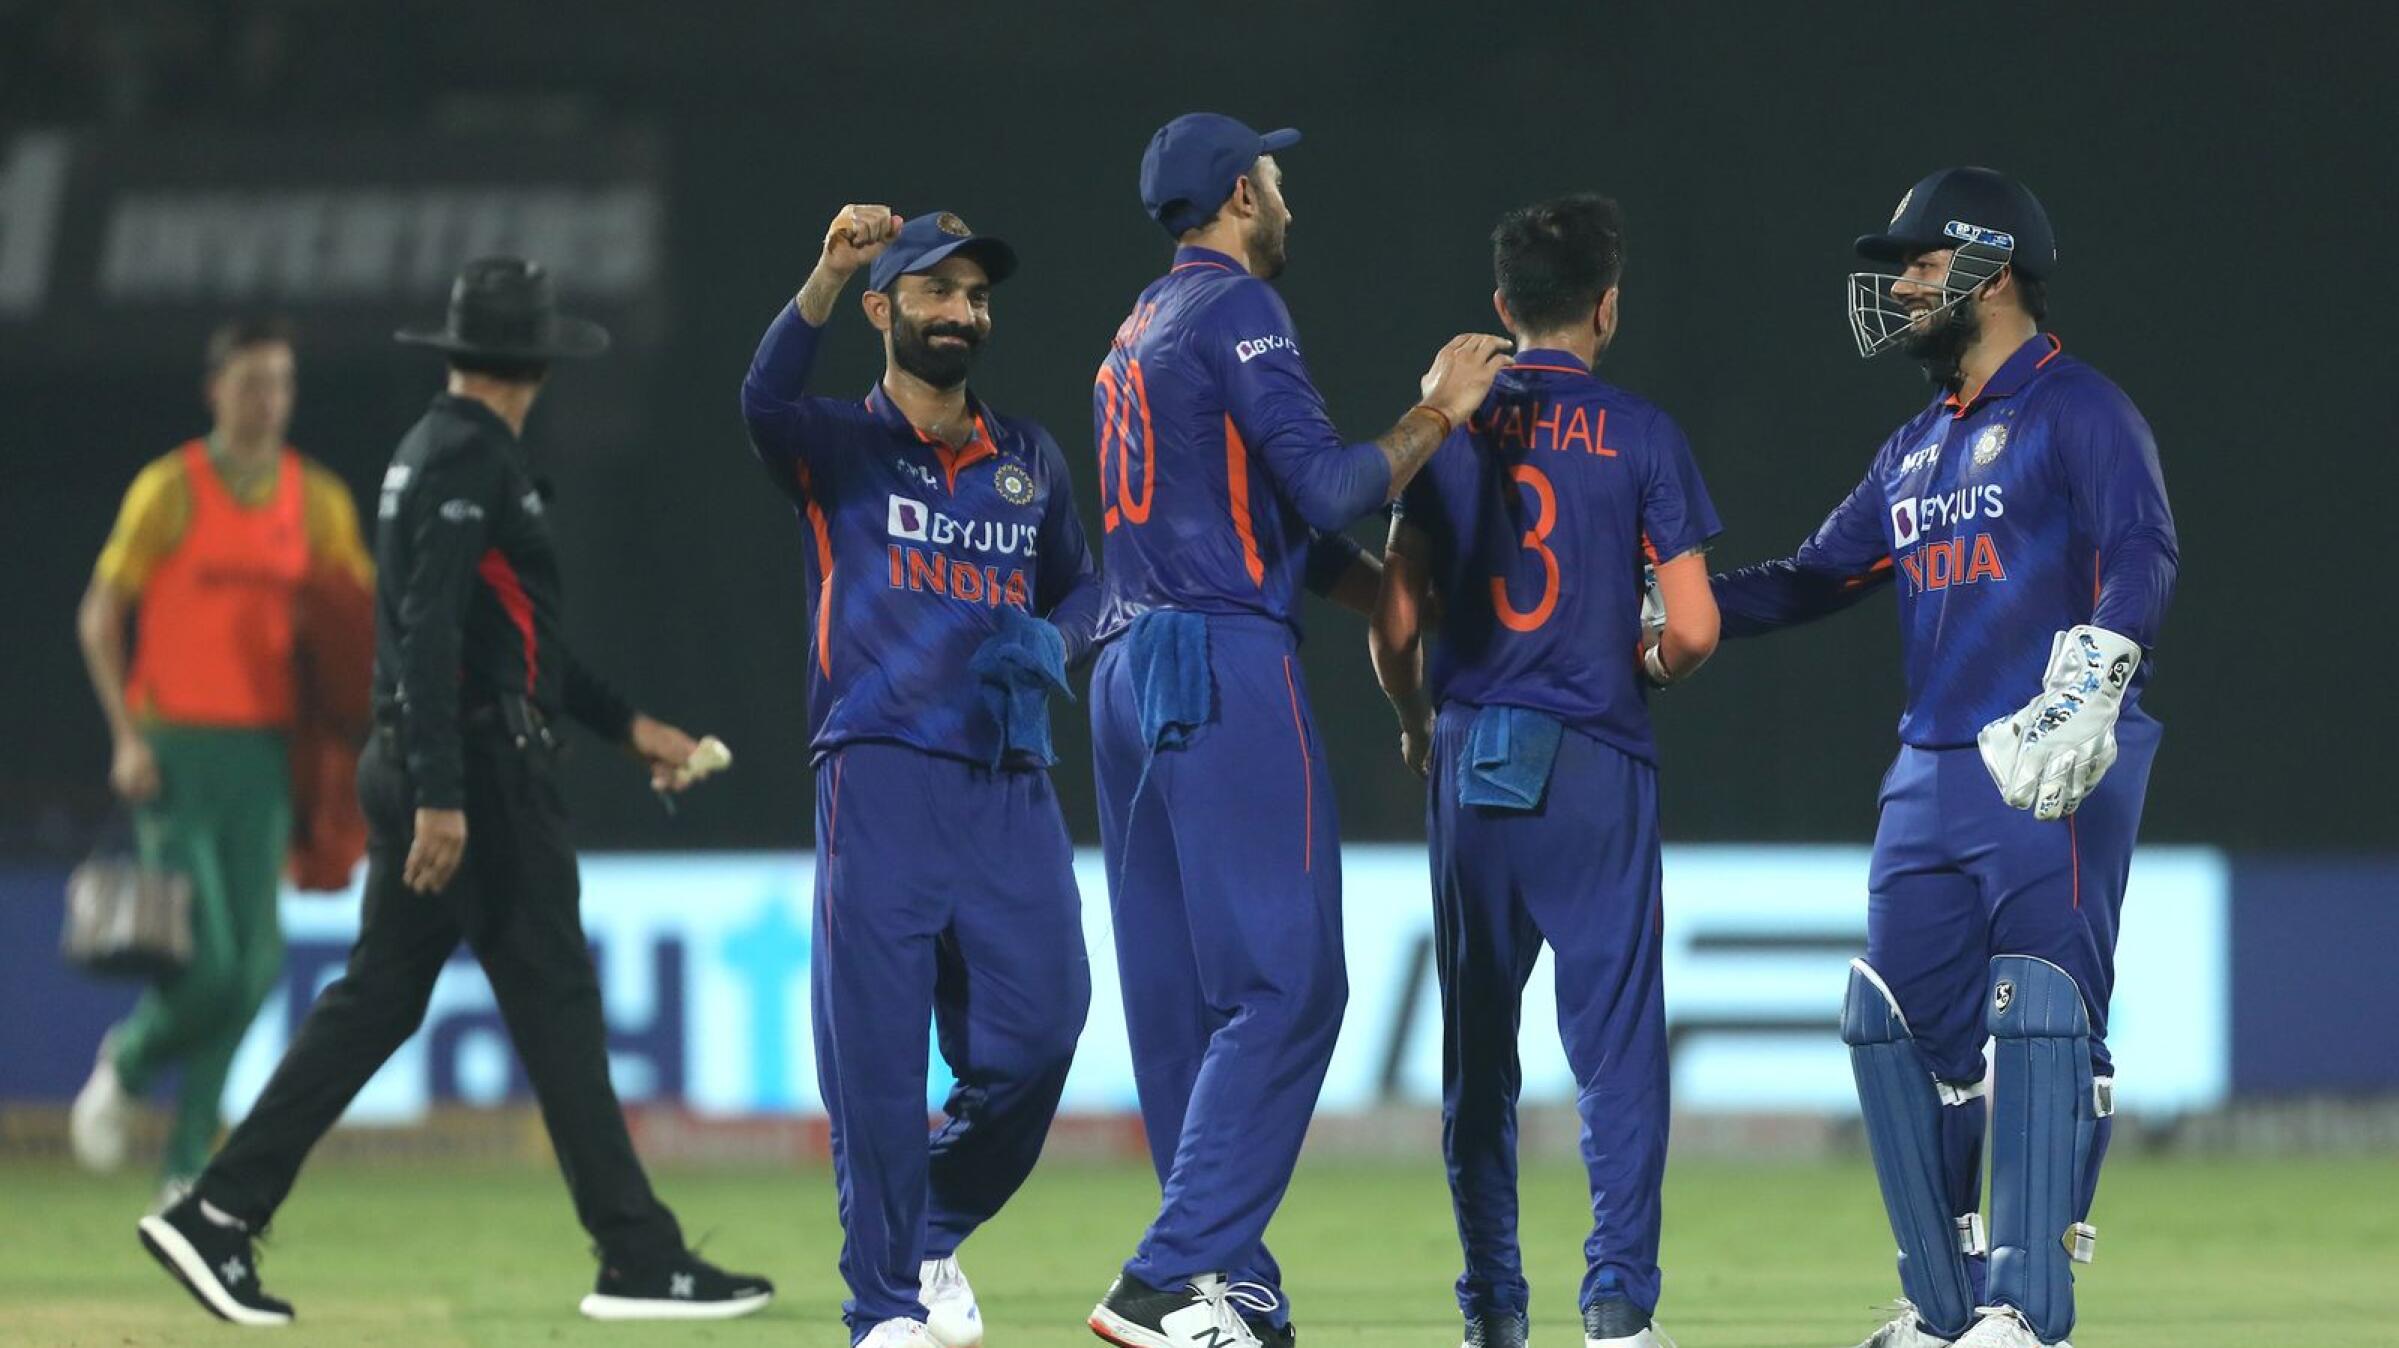 Yuzvendra Chahal picked up three wickets as India secured a convincing win over South Africa in the third T20 International in Visakhapatnam on Tuesday night